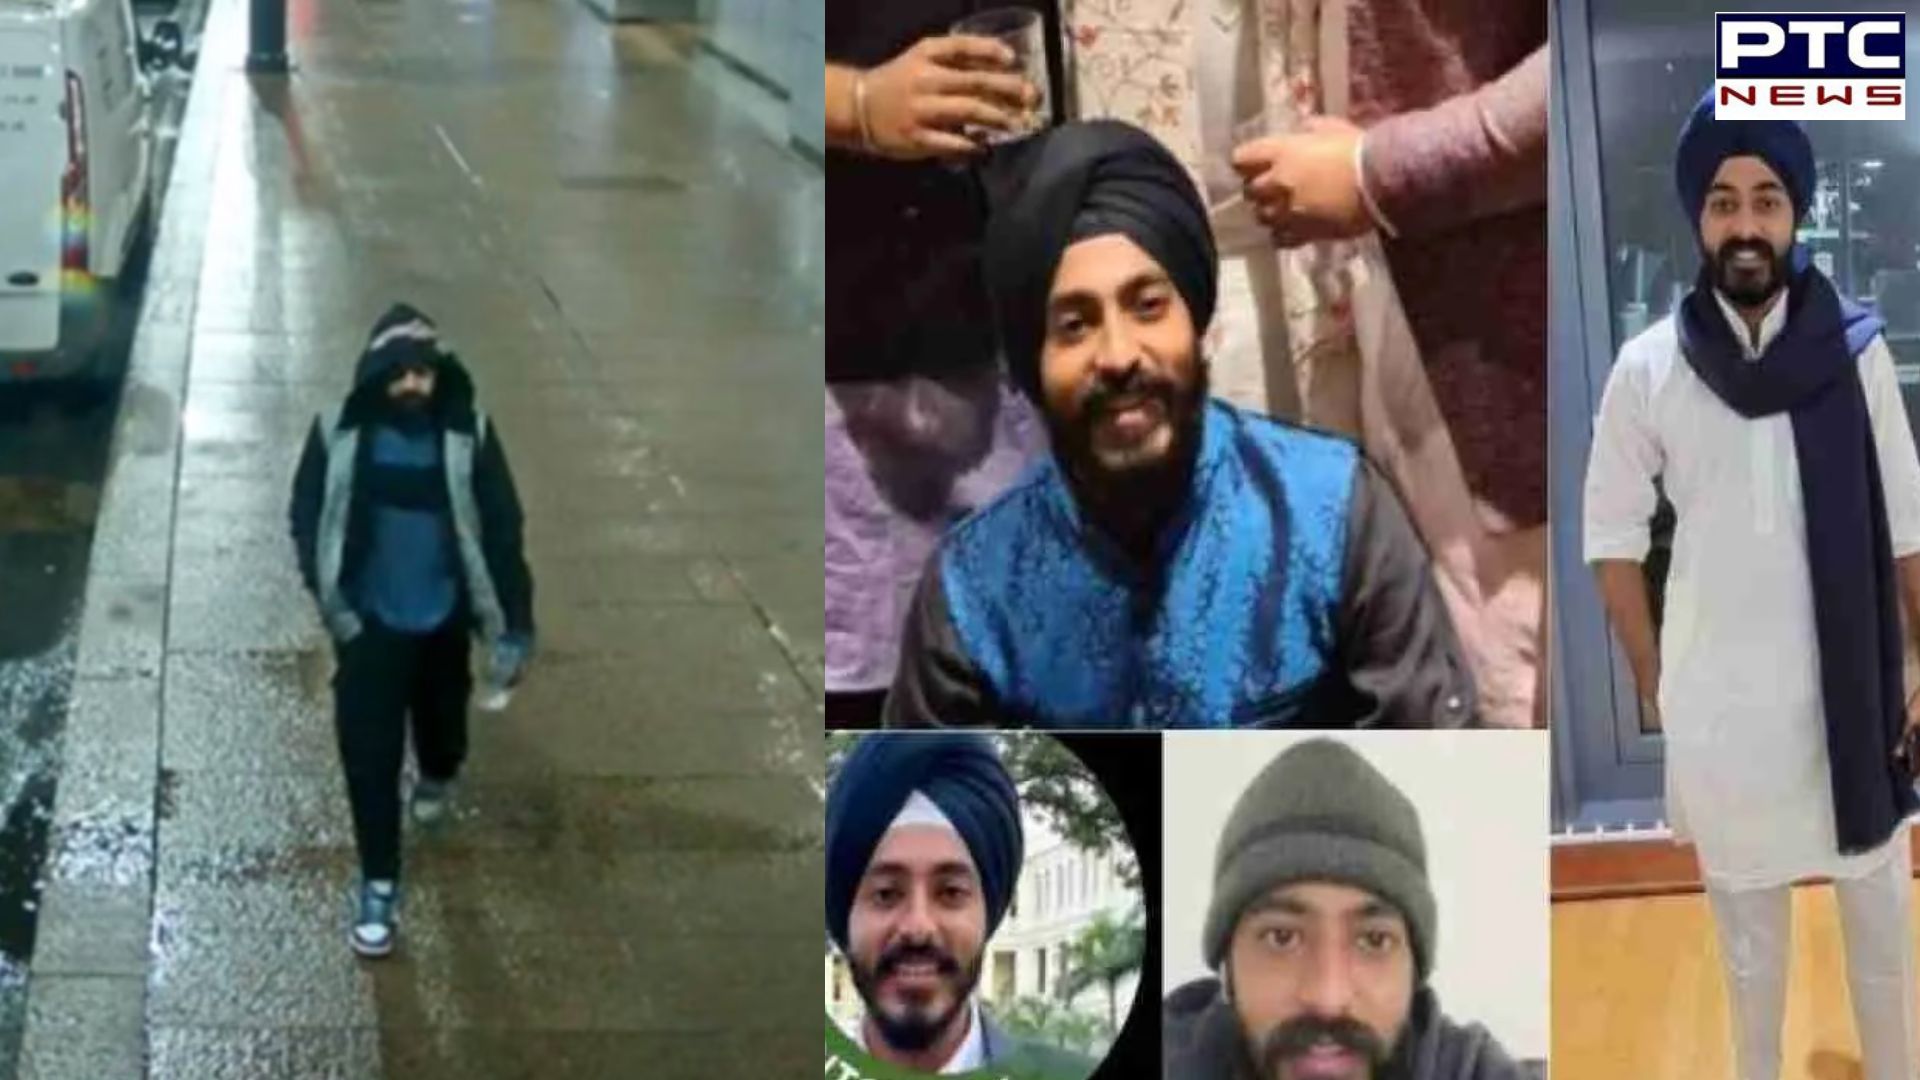 UK: Met Police releases CCTV image of GS Bhatia; probe ordered in tragic death incident